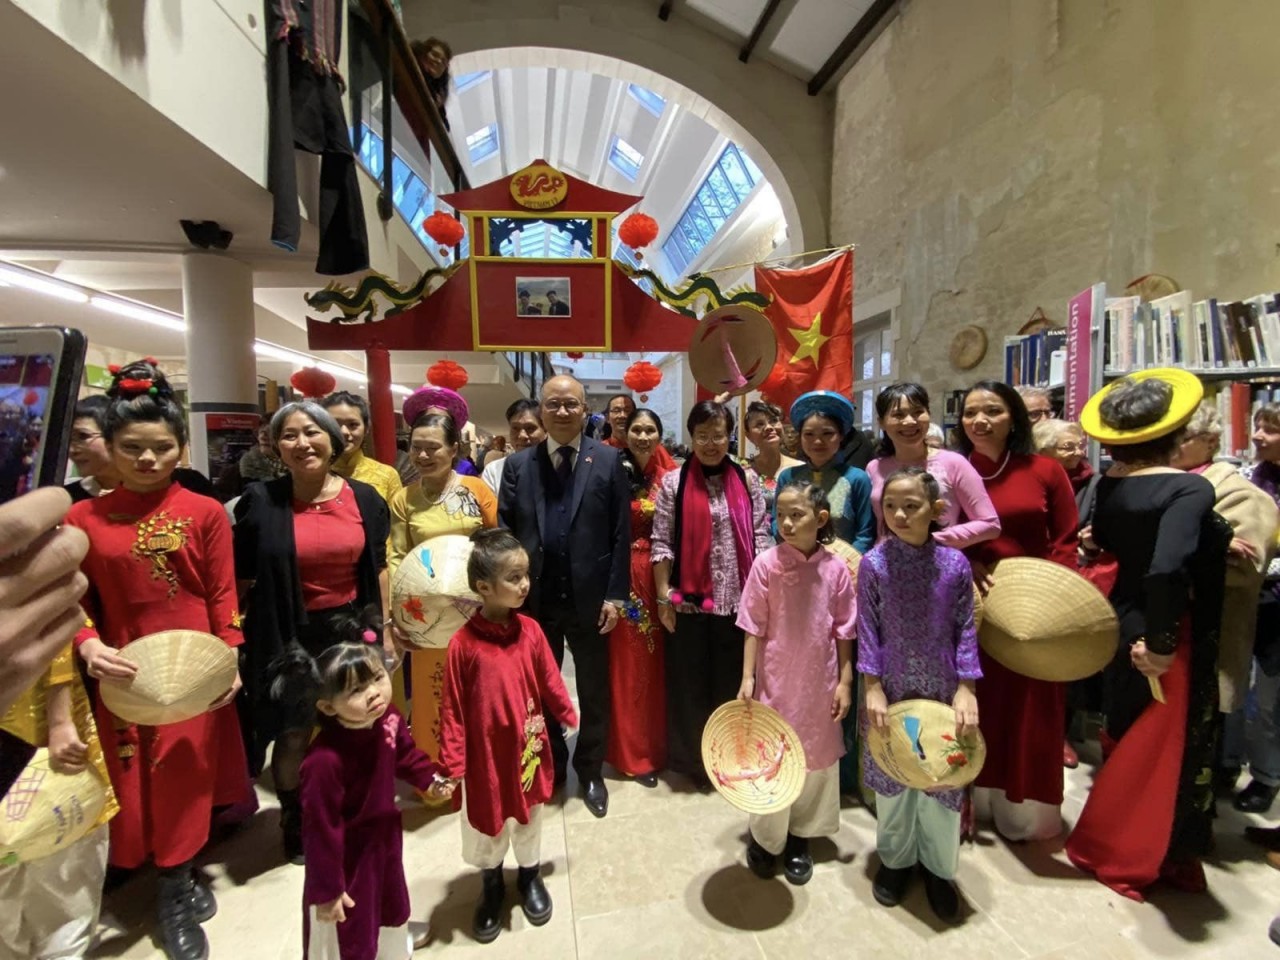 Show of Vietnamese ethnic minority costumes as part of the Vietnamese Cultural Day in Saintes.